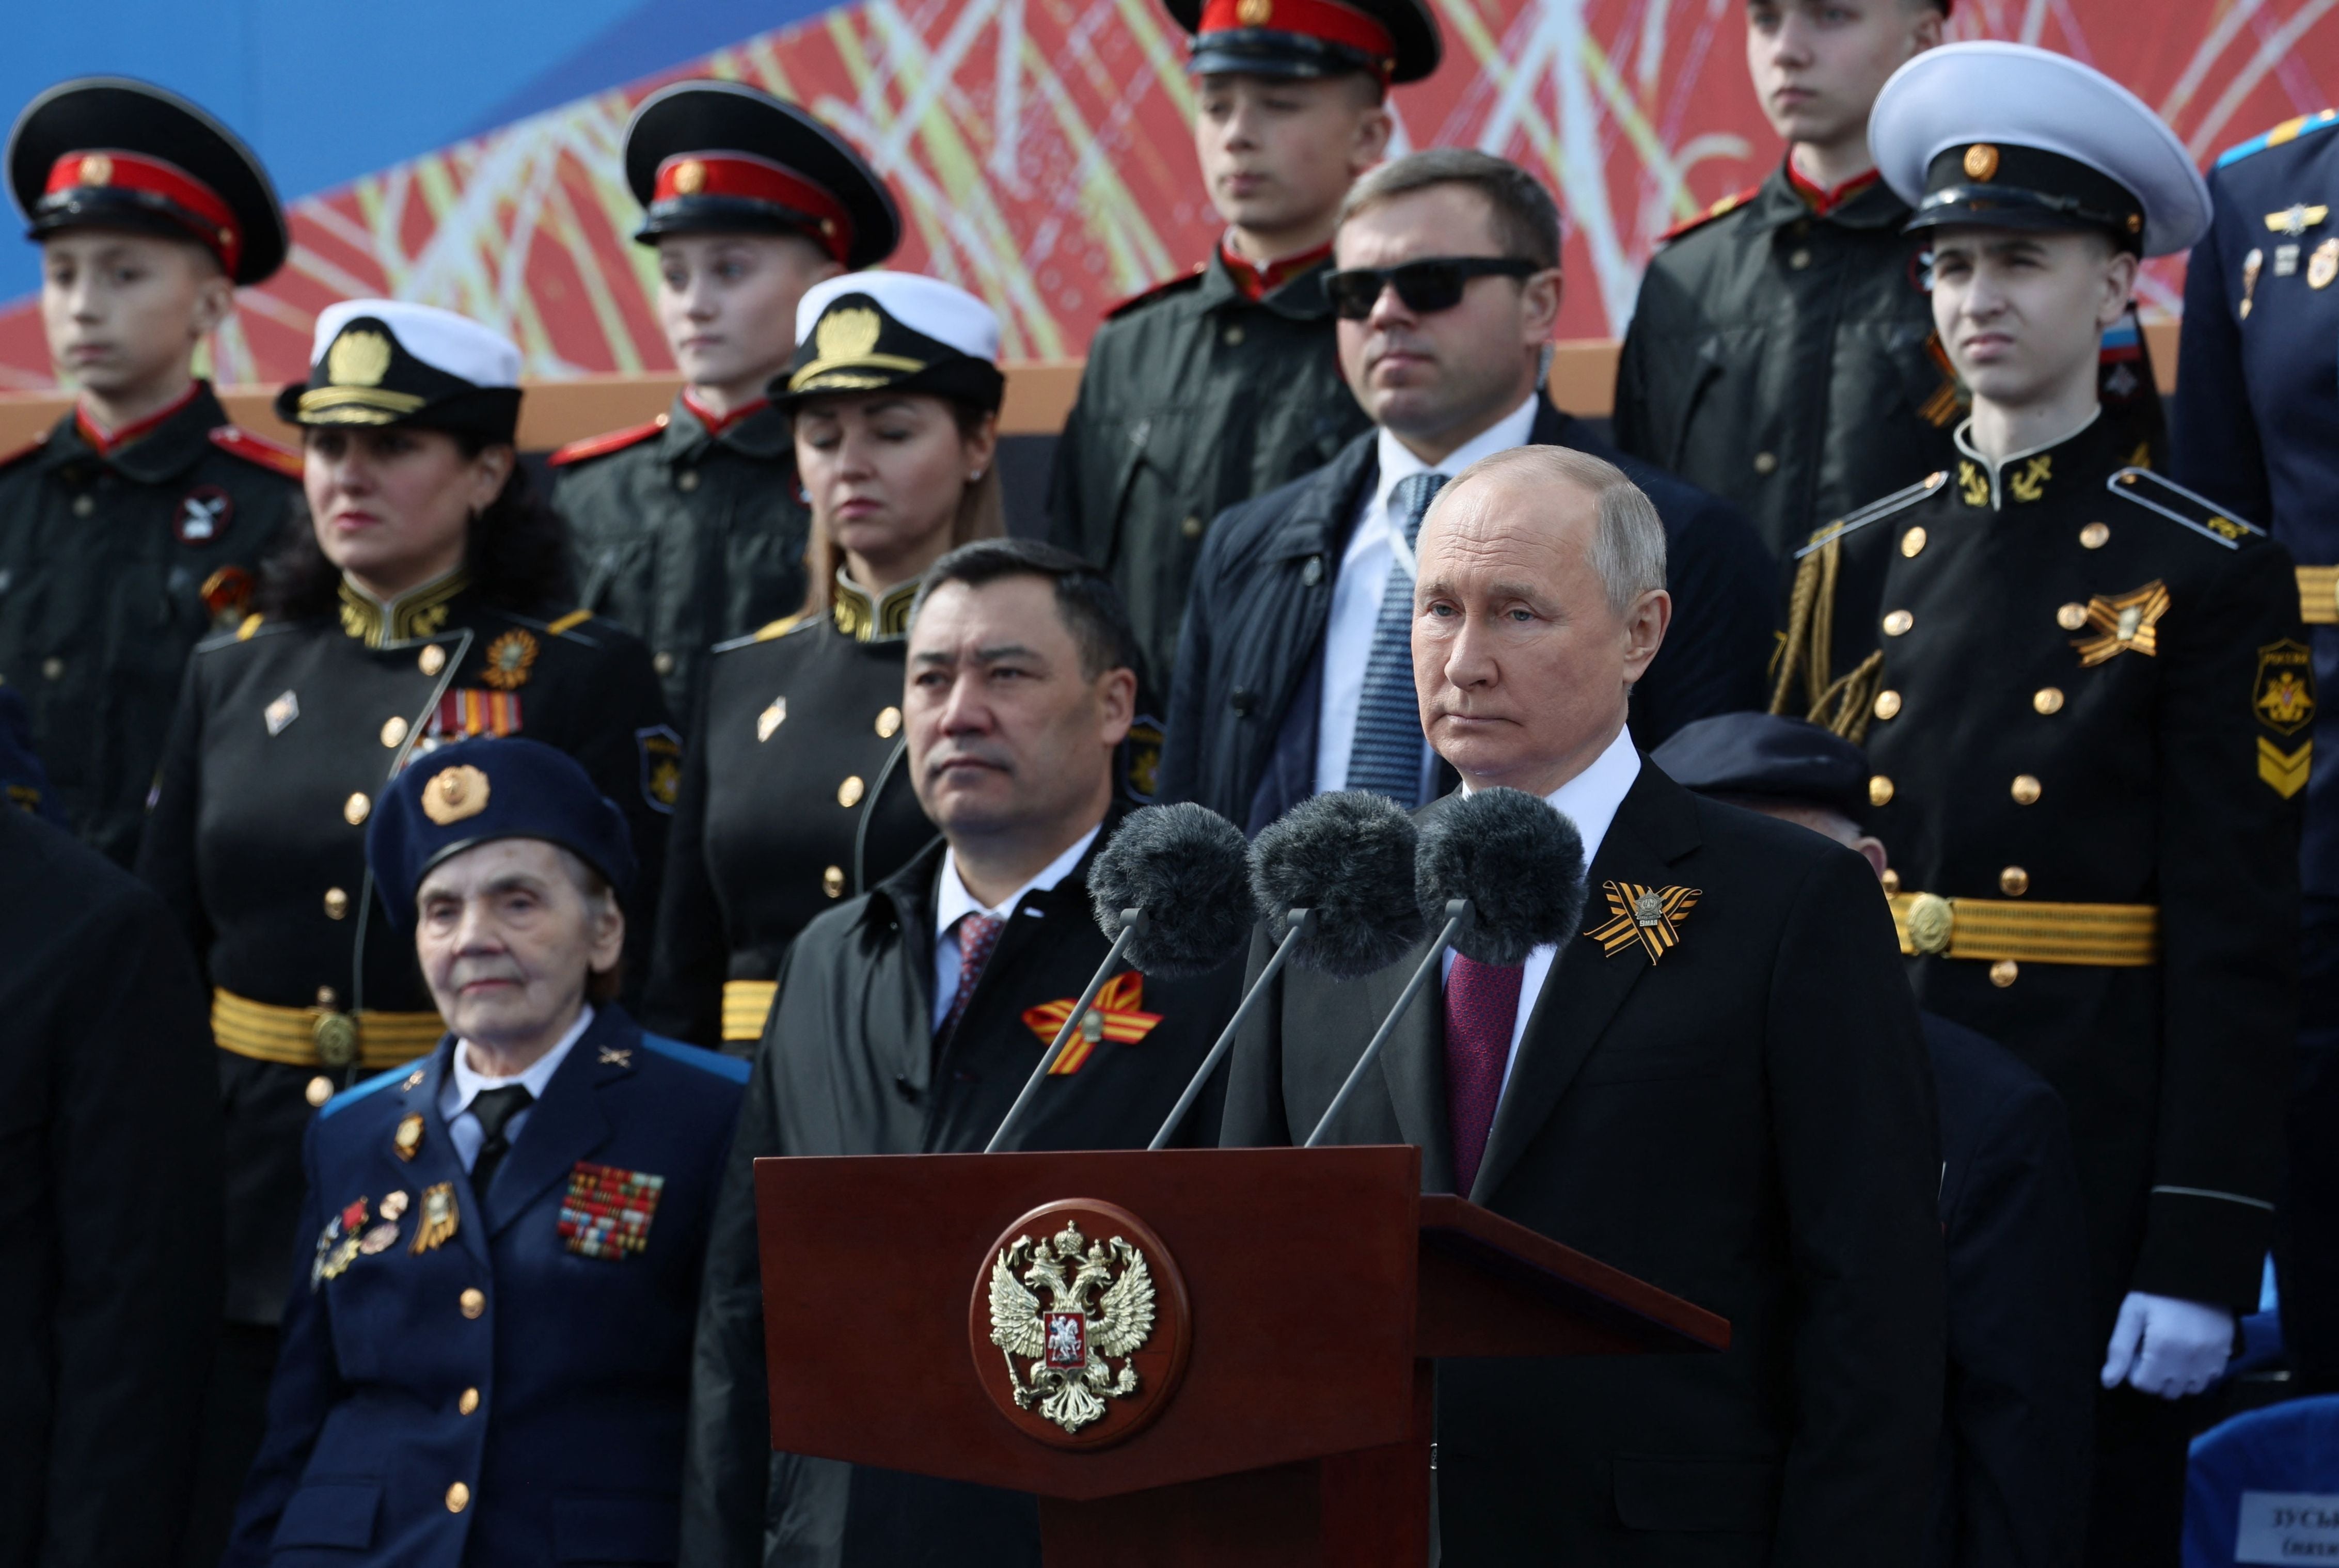 Russian president Vladimir Putin giving a speech during the Victory Day military parade at Red Square in central Moscow